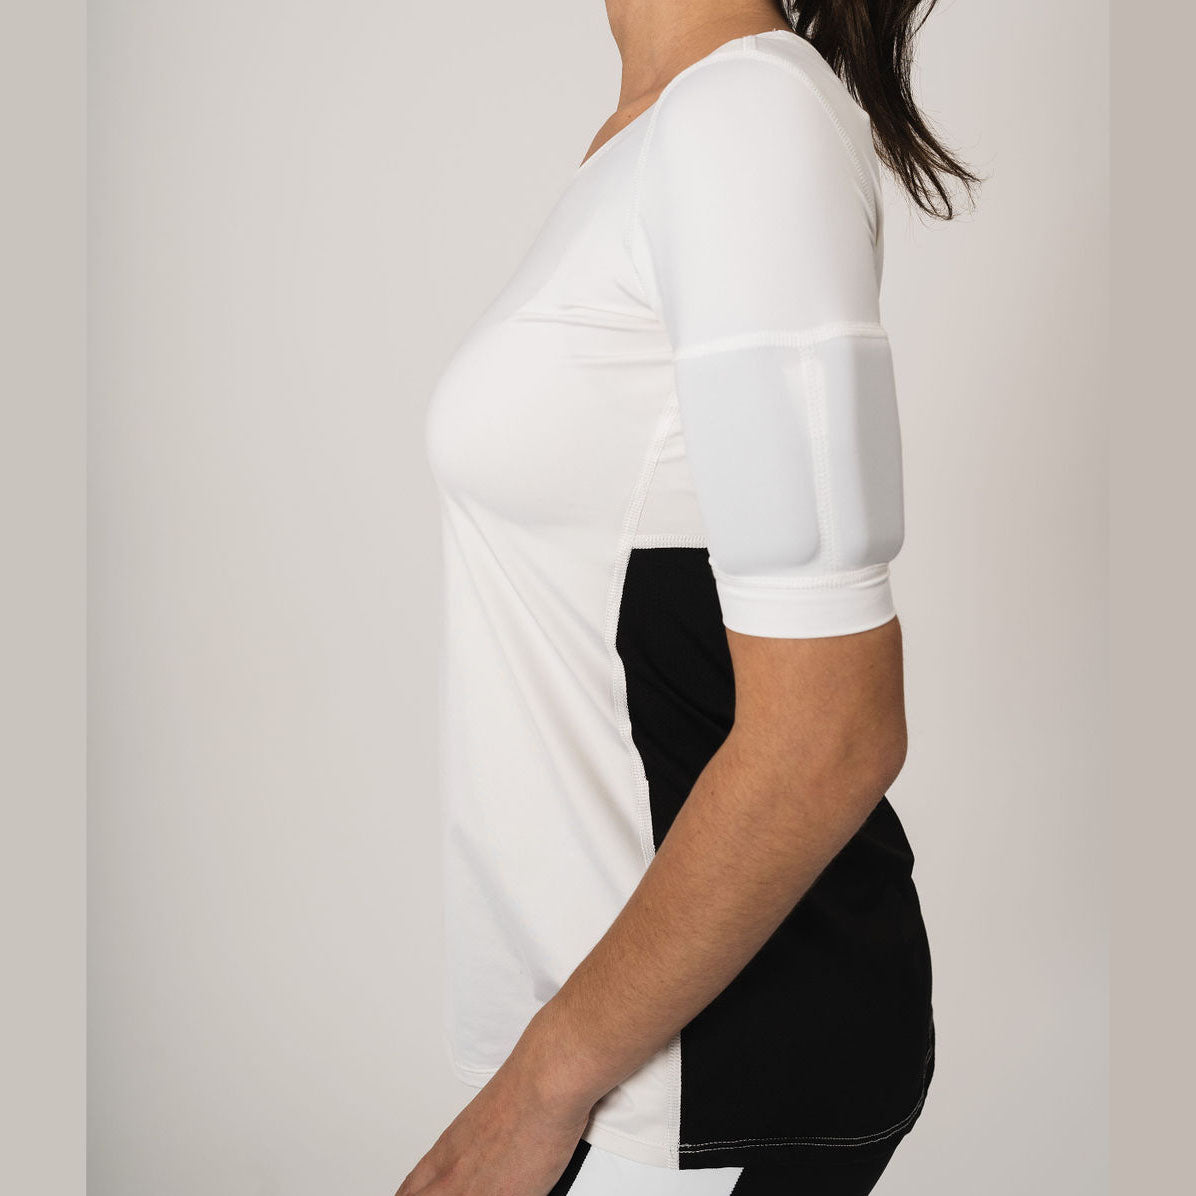 Women's Relaxed-Fit Short Sleeve